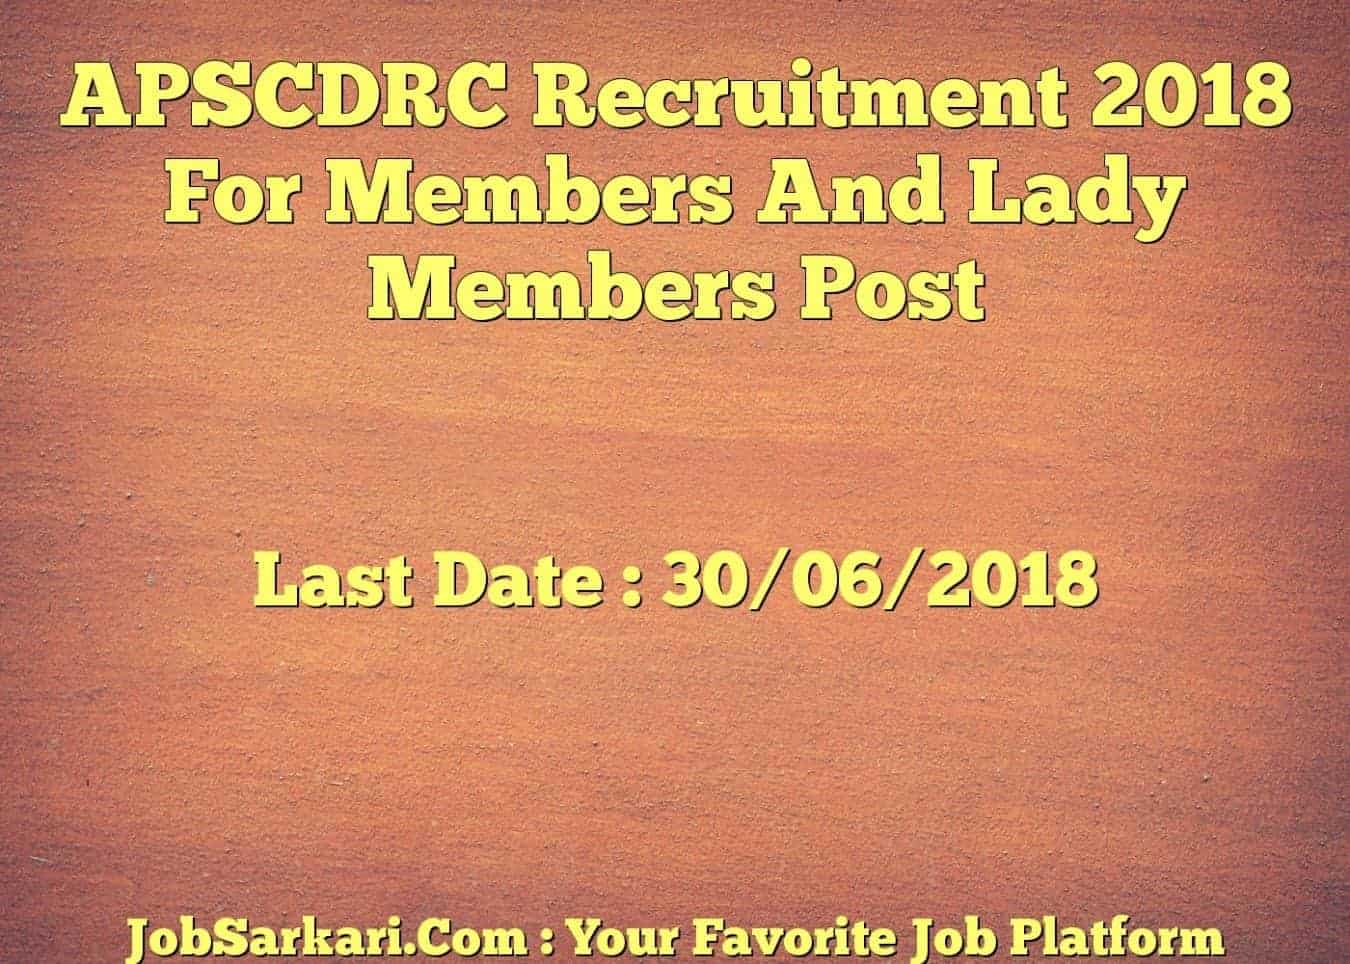 APSCDRC Recruitment 2018 For Members And Lady Members Post